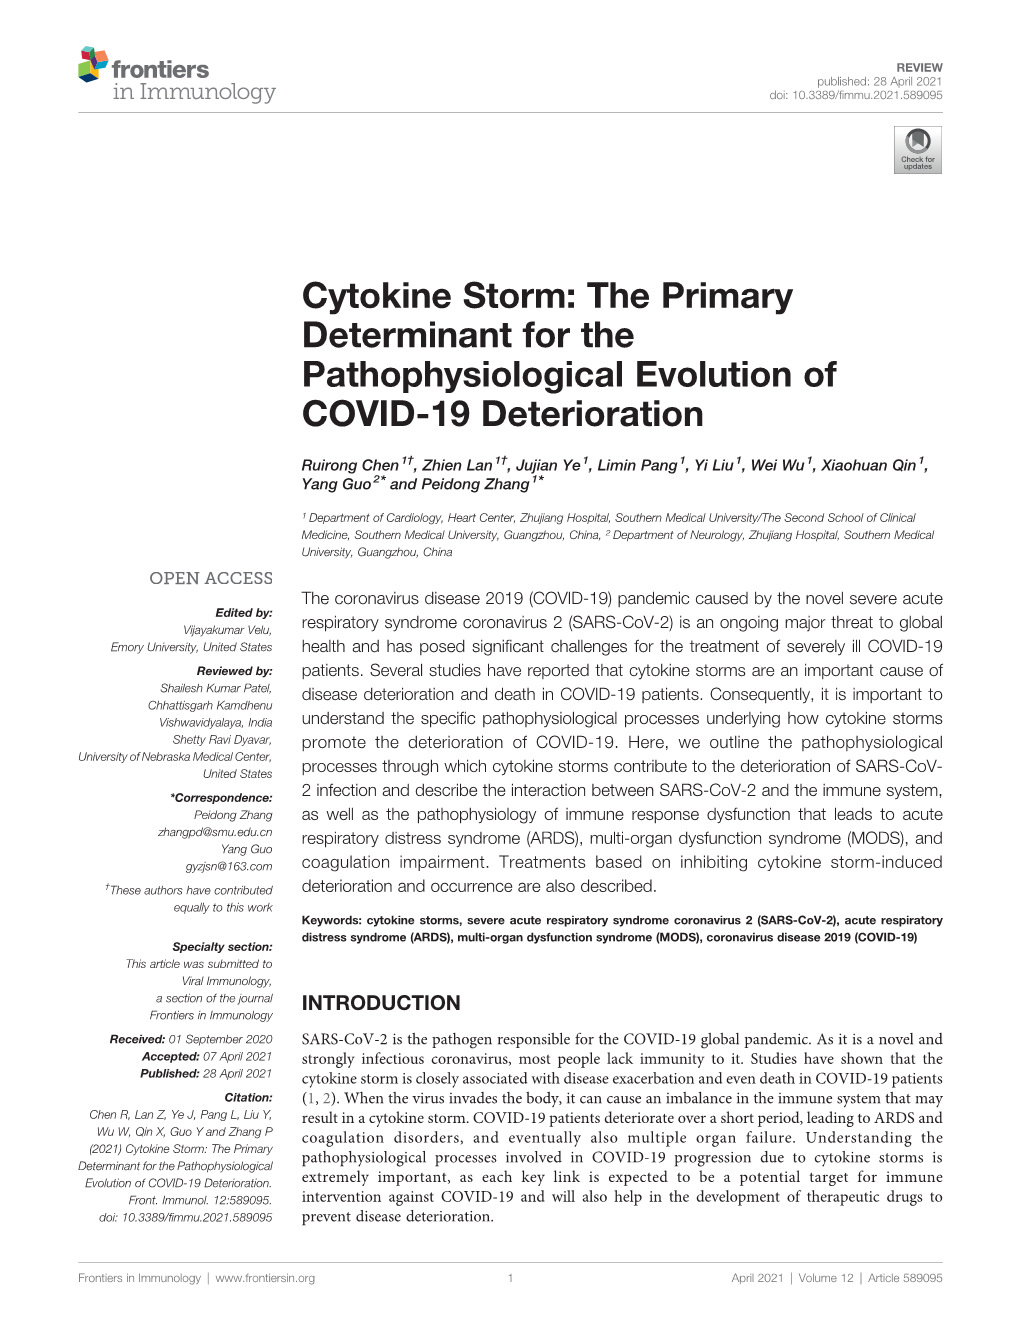 Cytokine Storm: the Primary Determinant for the Pathophysiological Evolution of COVID-19 Deterioration